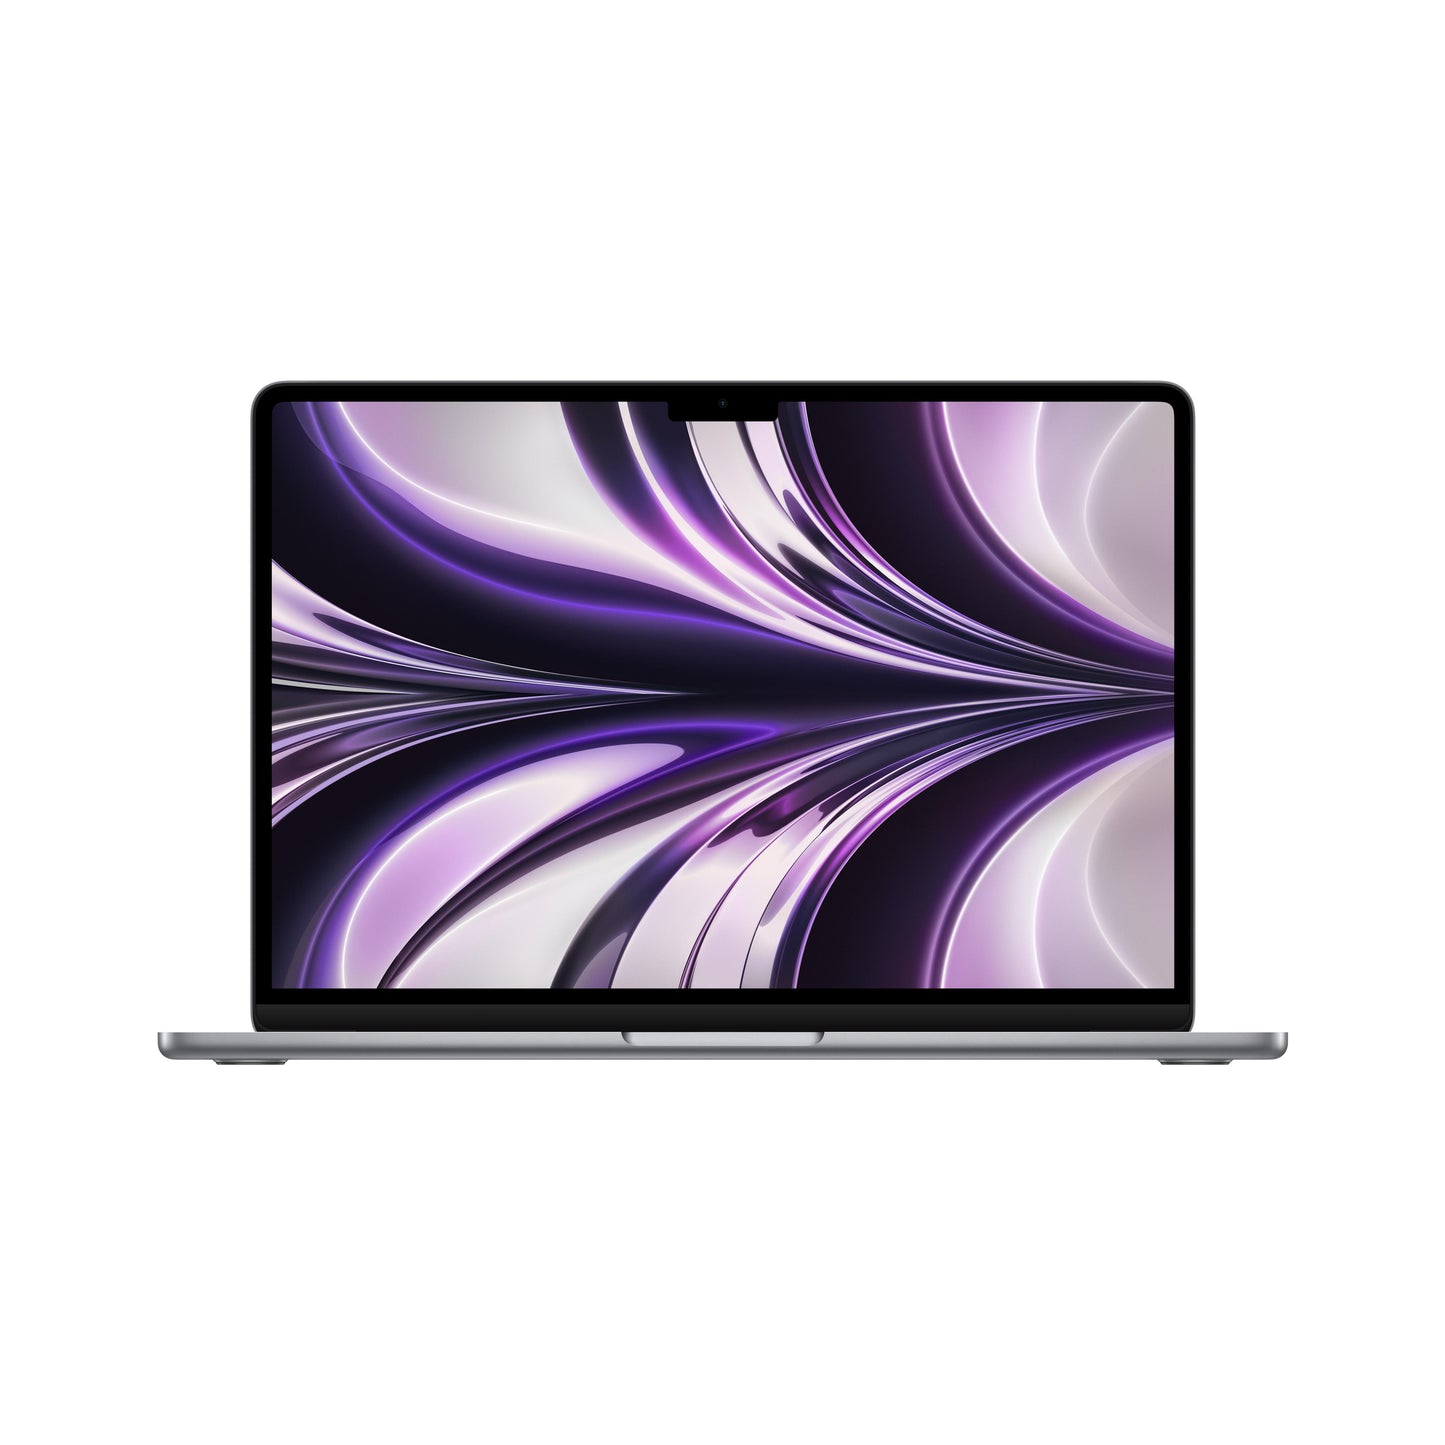 13-inch MacBook Air: Apple M2 chip with 8?core CPU and 10?core GPU, 512GB SSD - Space Grey